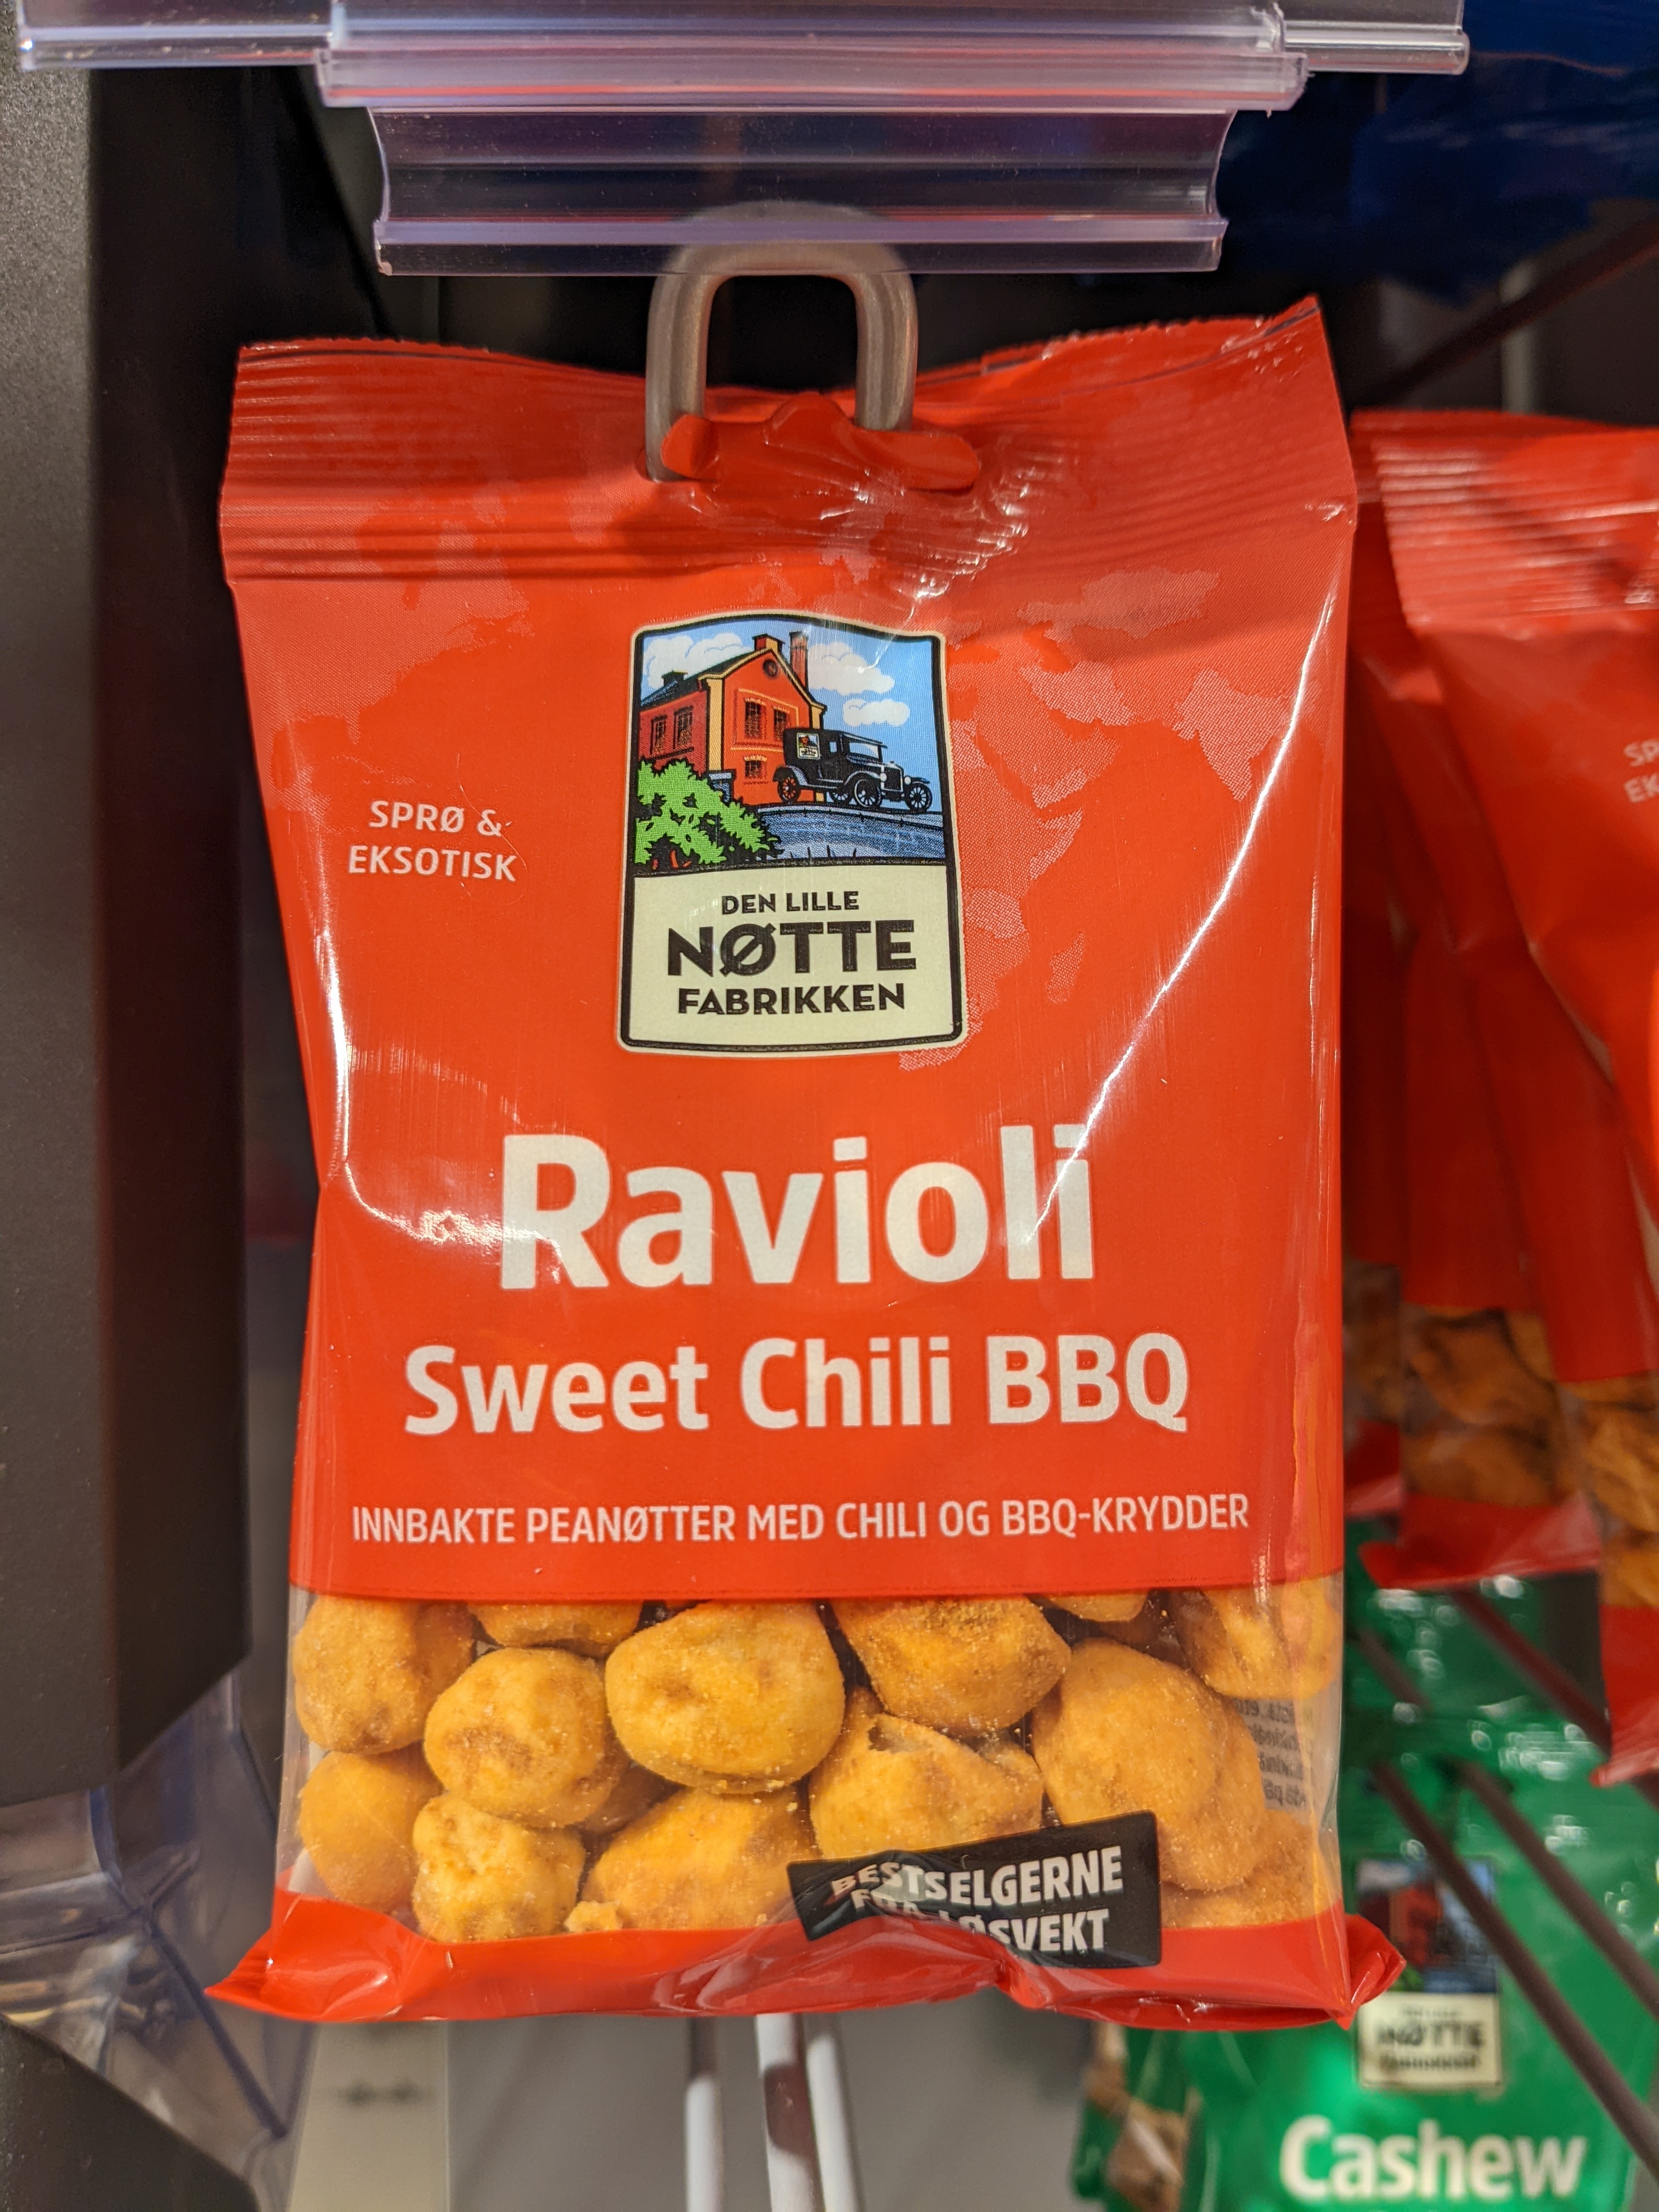 a package of "sweet chili bbq" "ravioli" snacks to be eaten straight from the package